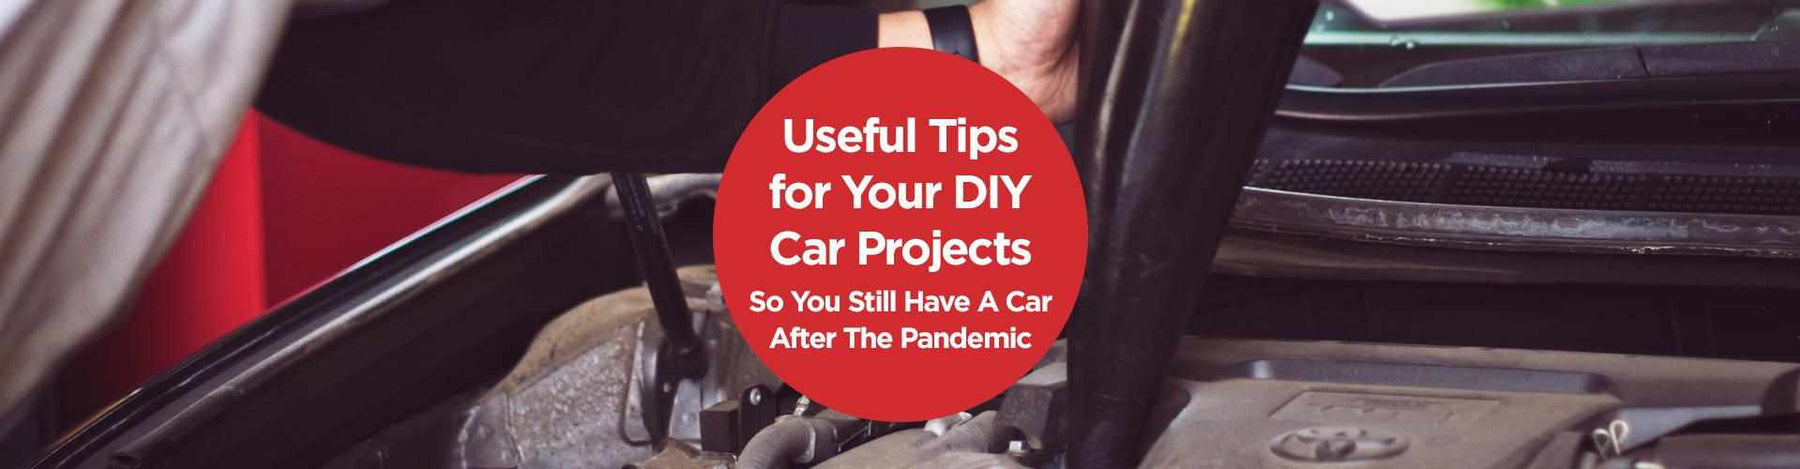 Useful Tips for Your DIY Car Projects So You Still Have A Car After The Pandemic -  - BlackboxMyCar Canada